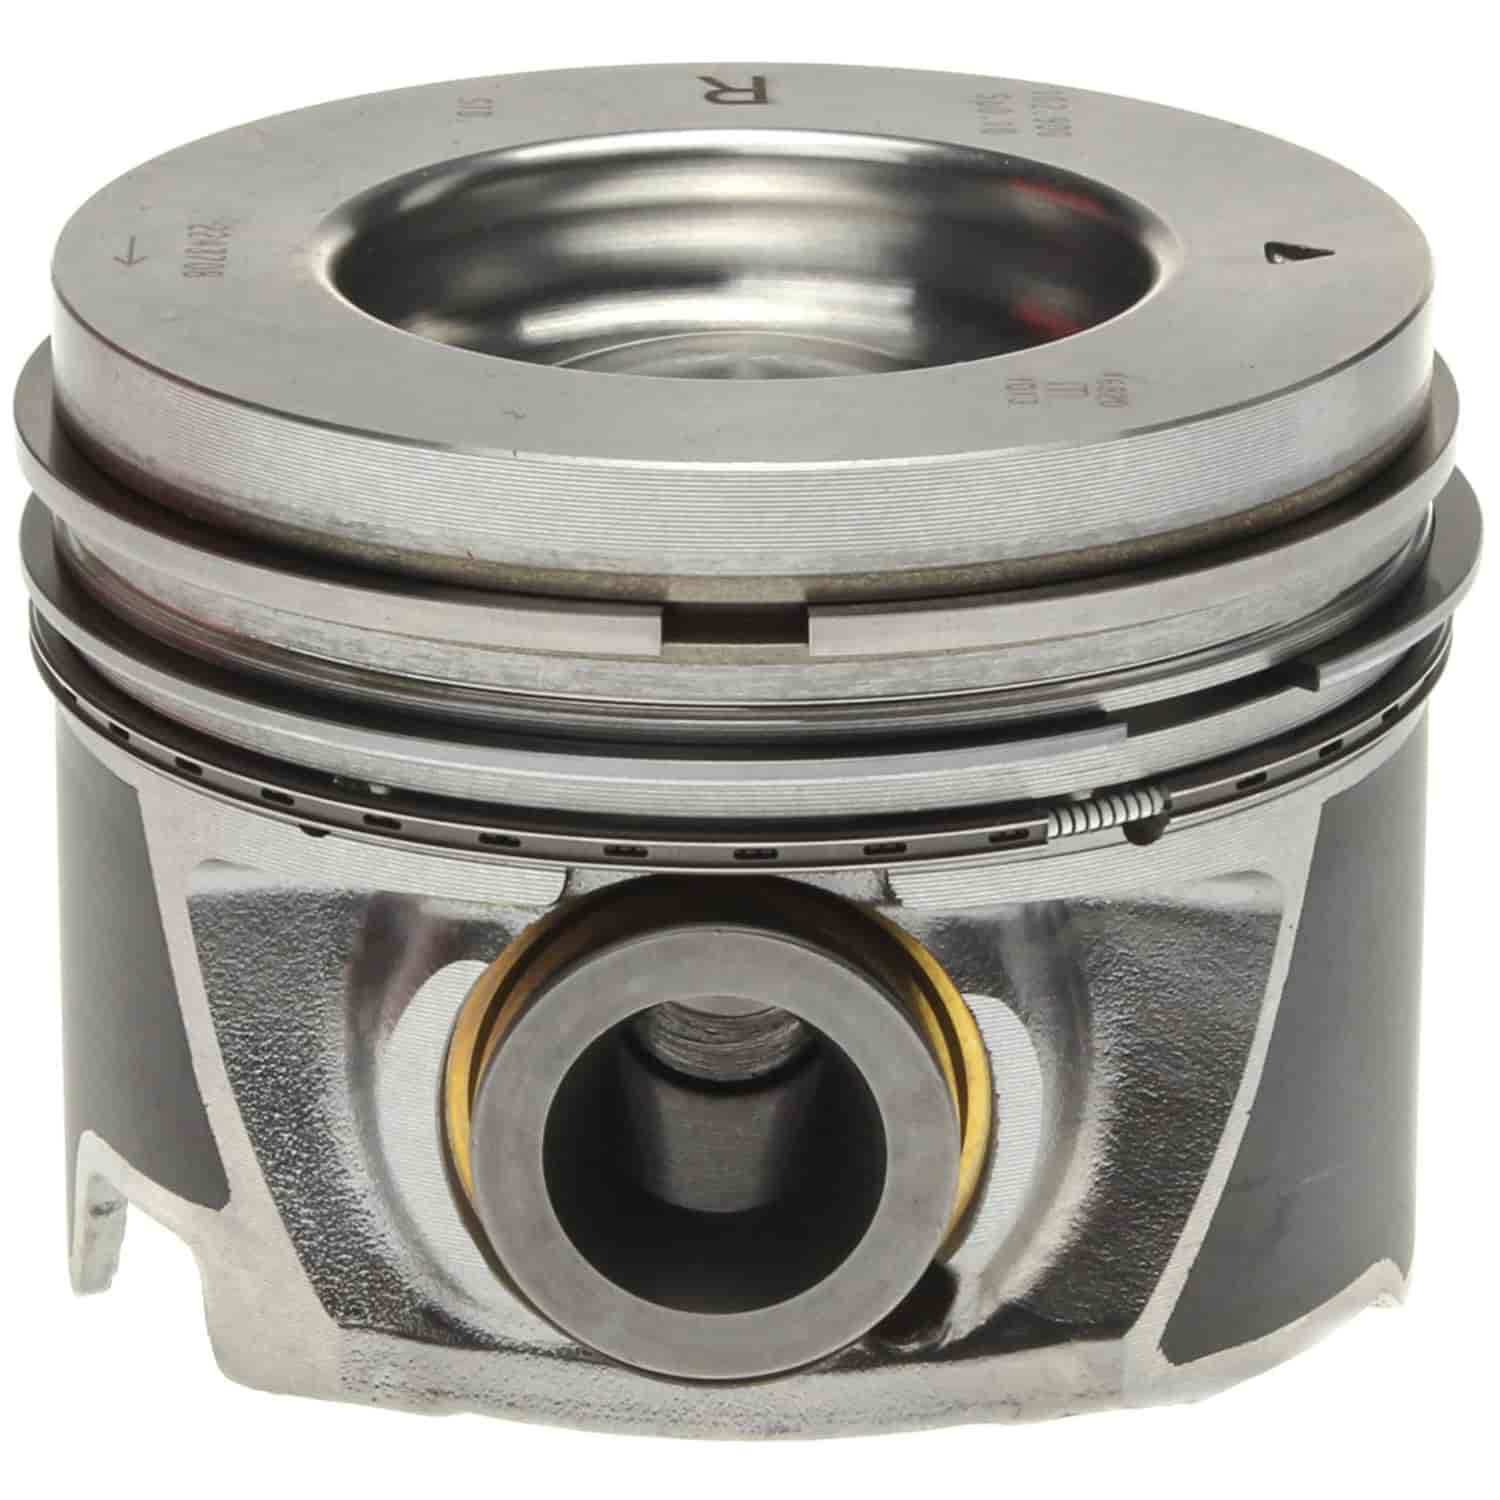 Piston and Rings Set 2006-2010 Chevy/GMC Duramax Diesel V8 6.6L Right Bank with 4.055" Bore (Standard)